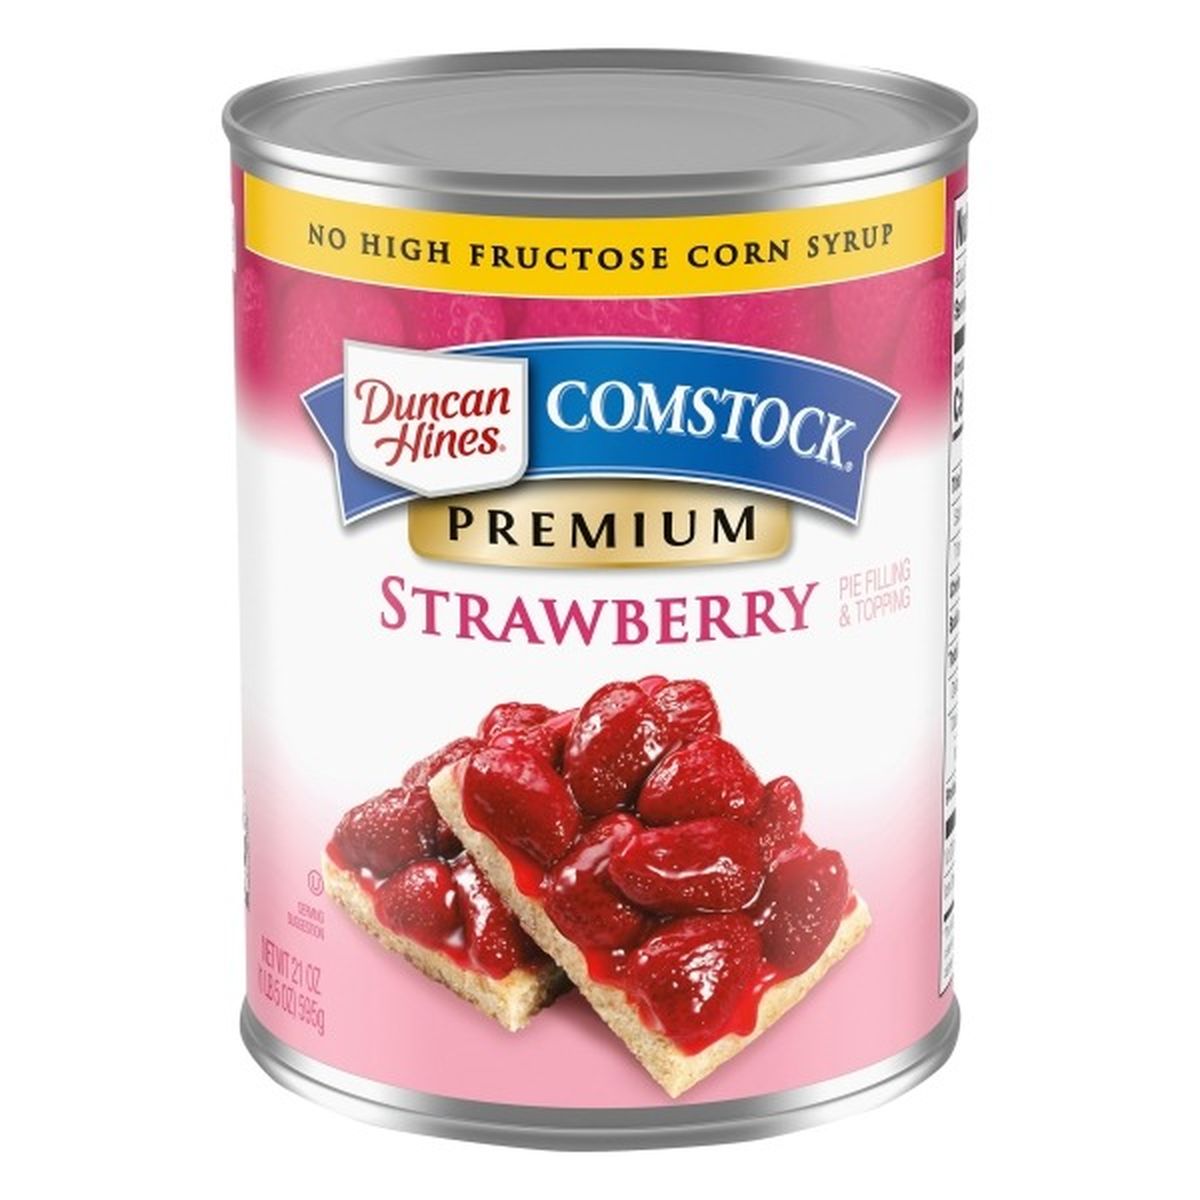 Calories in Duncan Hines Comstock Comstock Premium Pie Filling & Topping, Strawberry